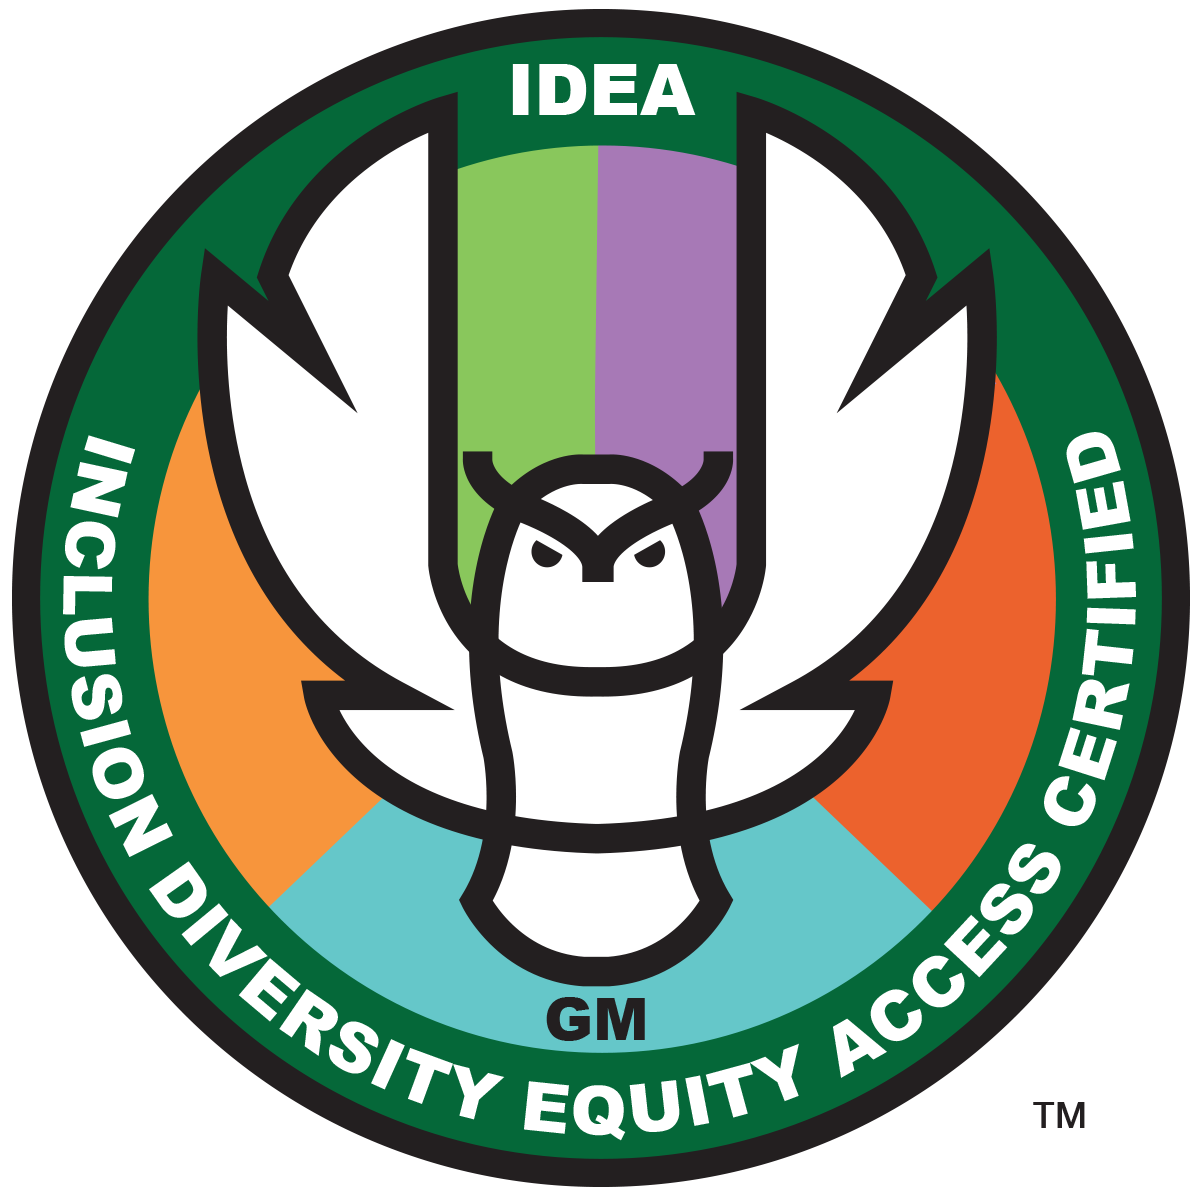 Inclusion Diversity Equity Access Certified - GordonMeeker